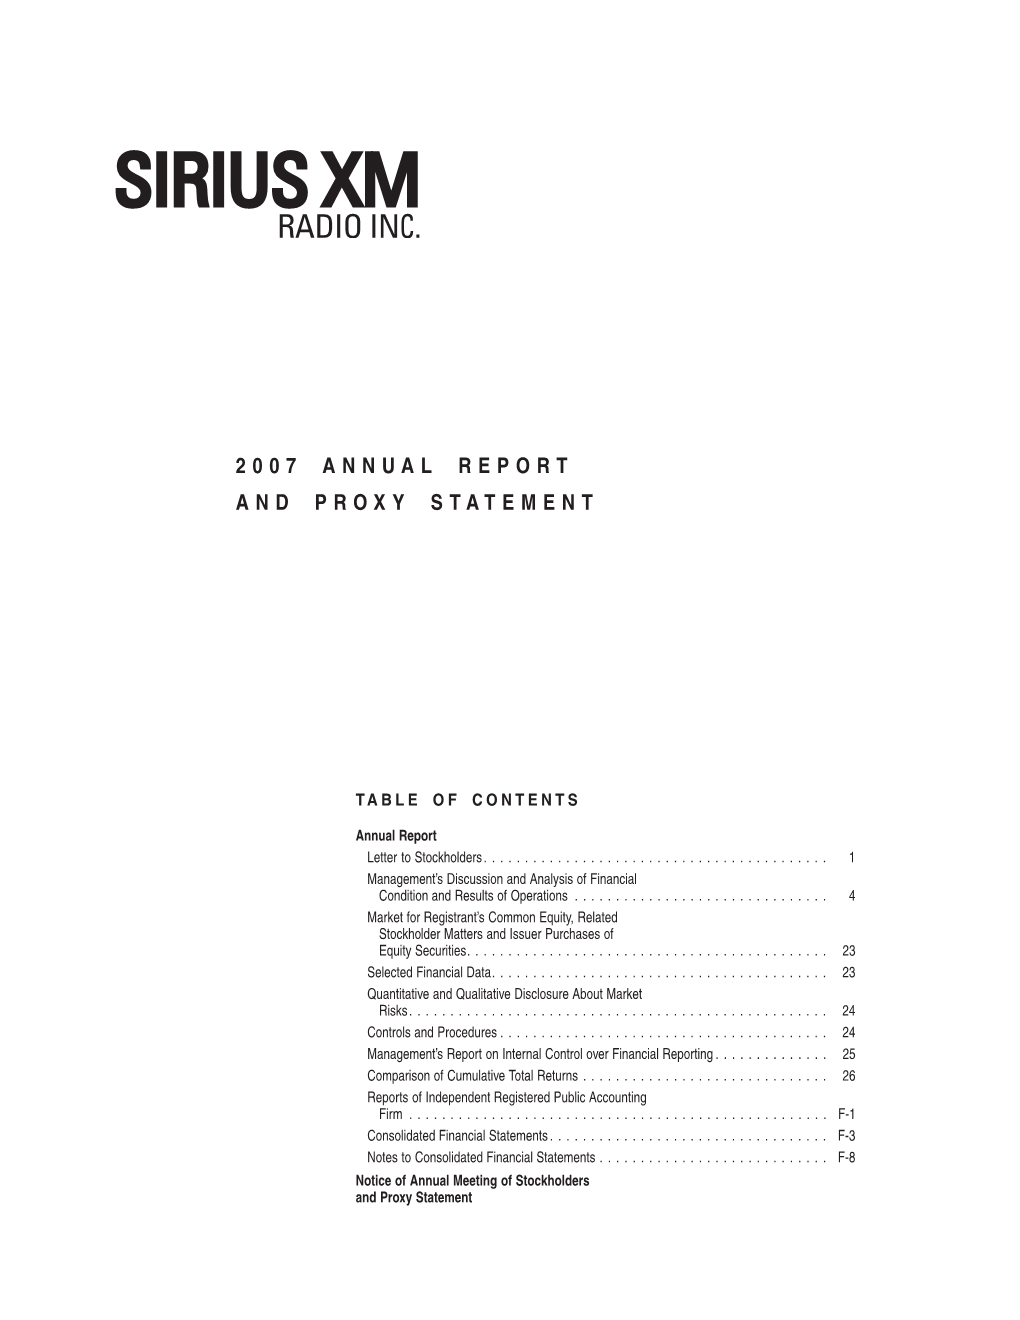 2007 Annual Report and Proxy Statement